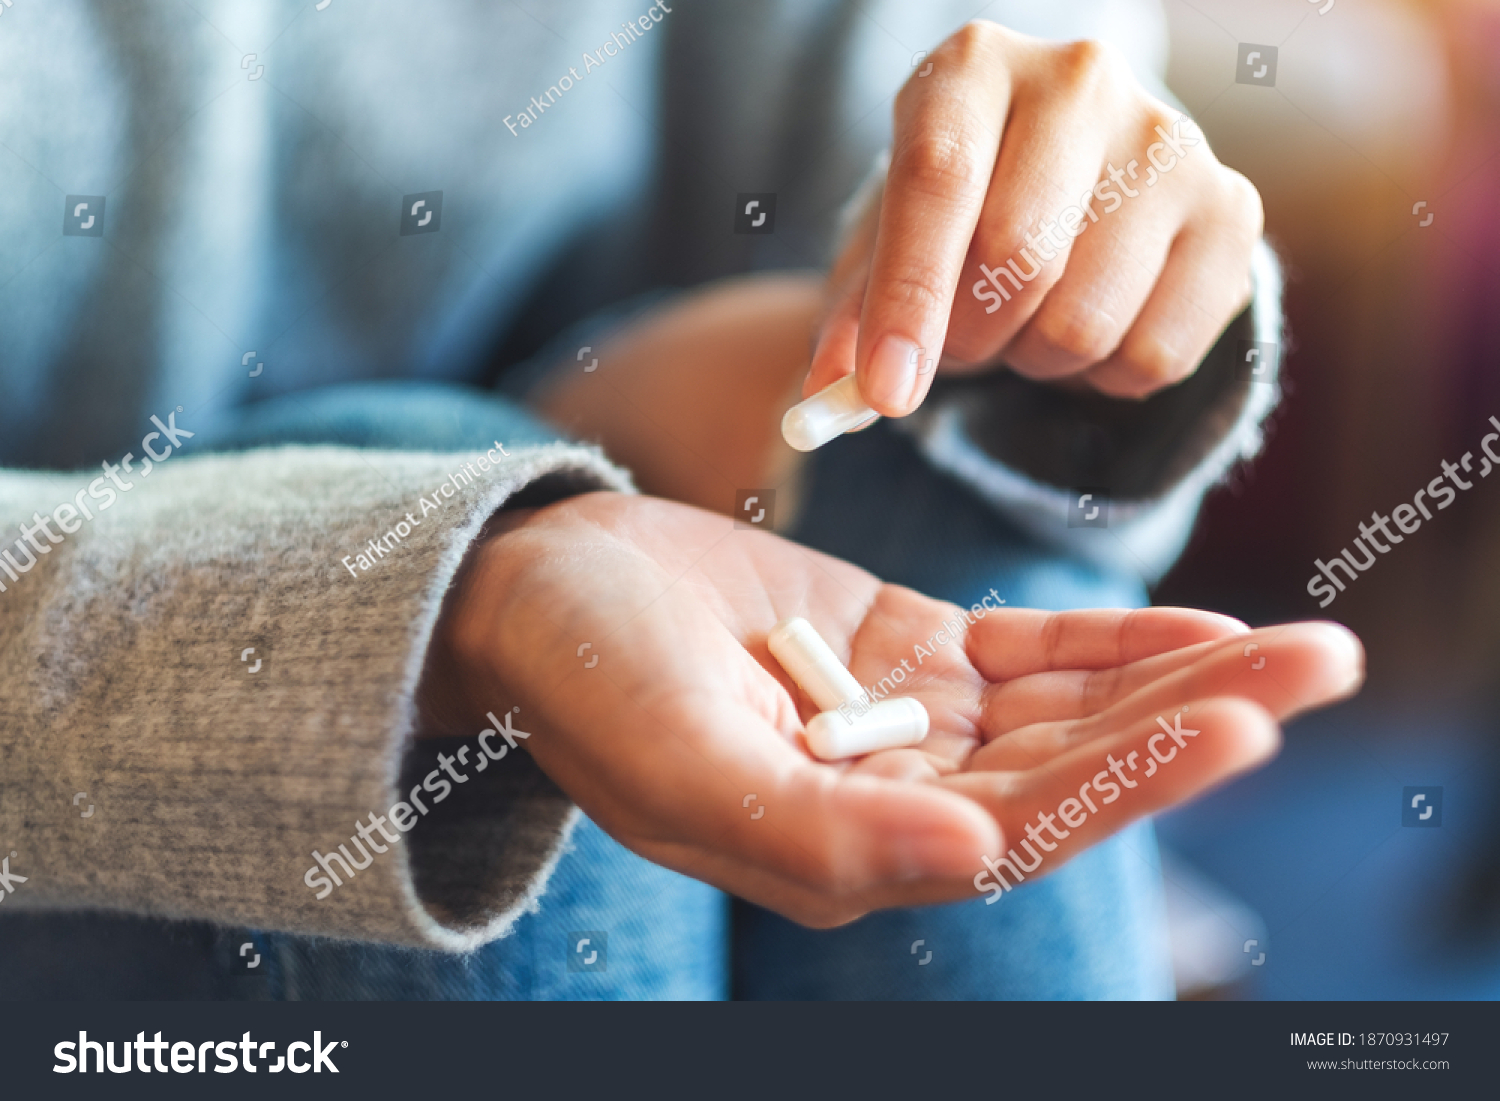 Closeup image of a woman holding and picking white medicine capsules in hand #1870931497